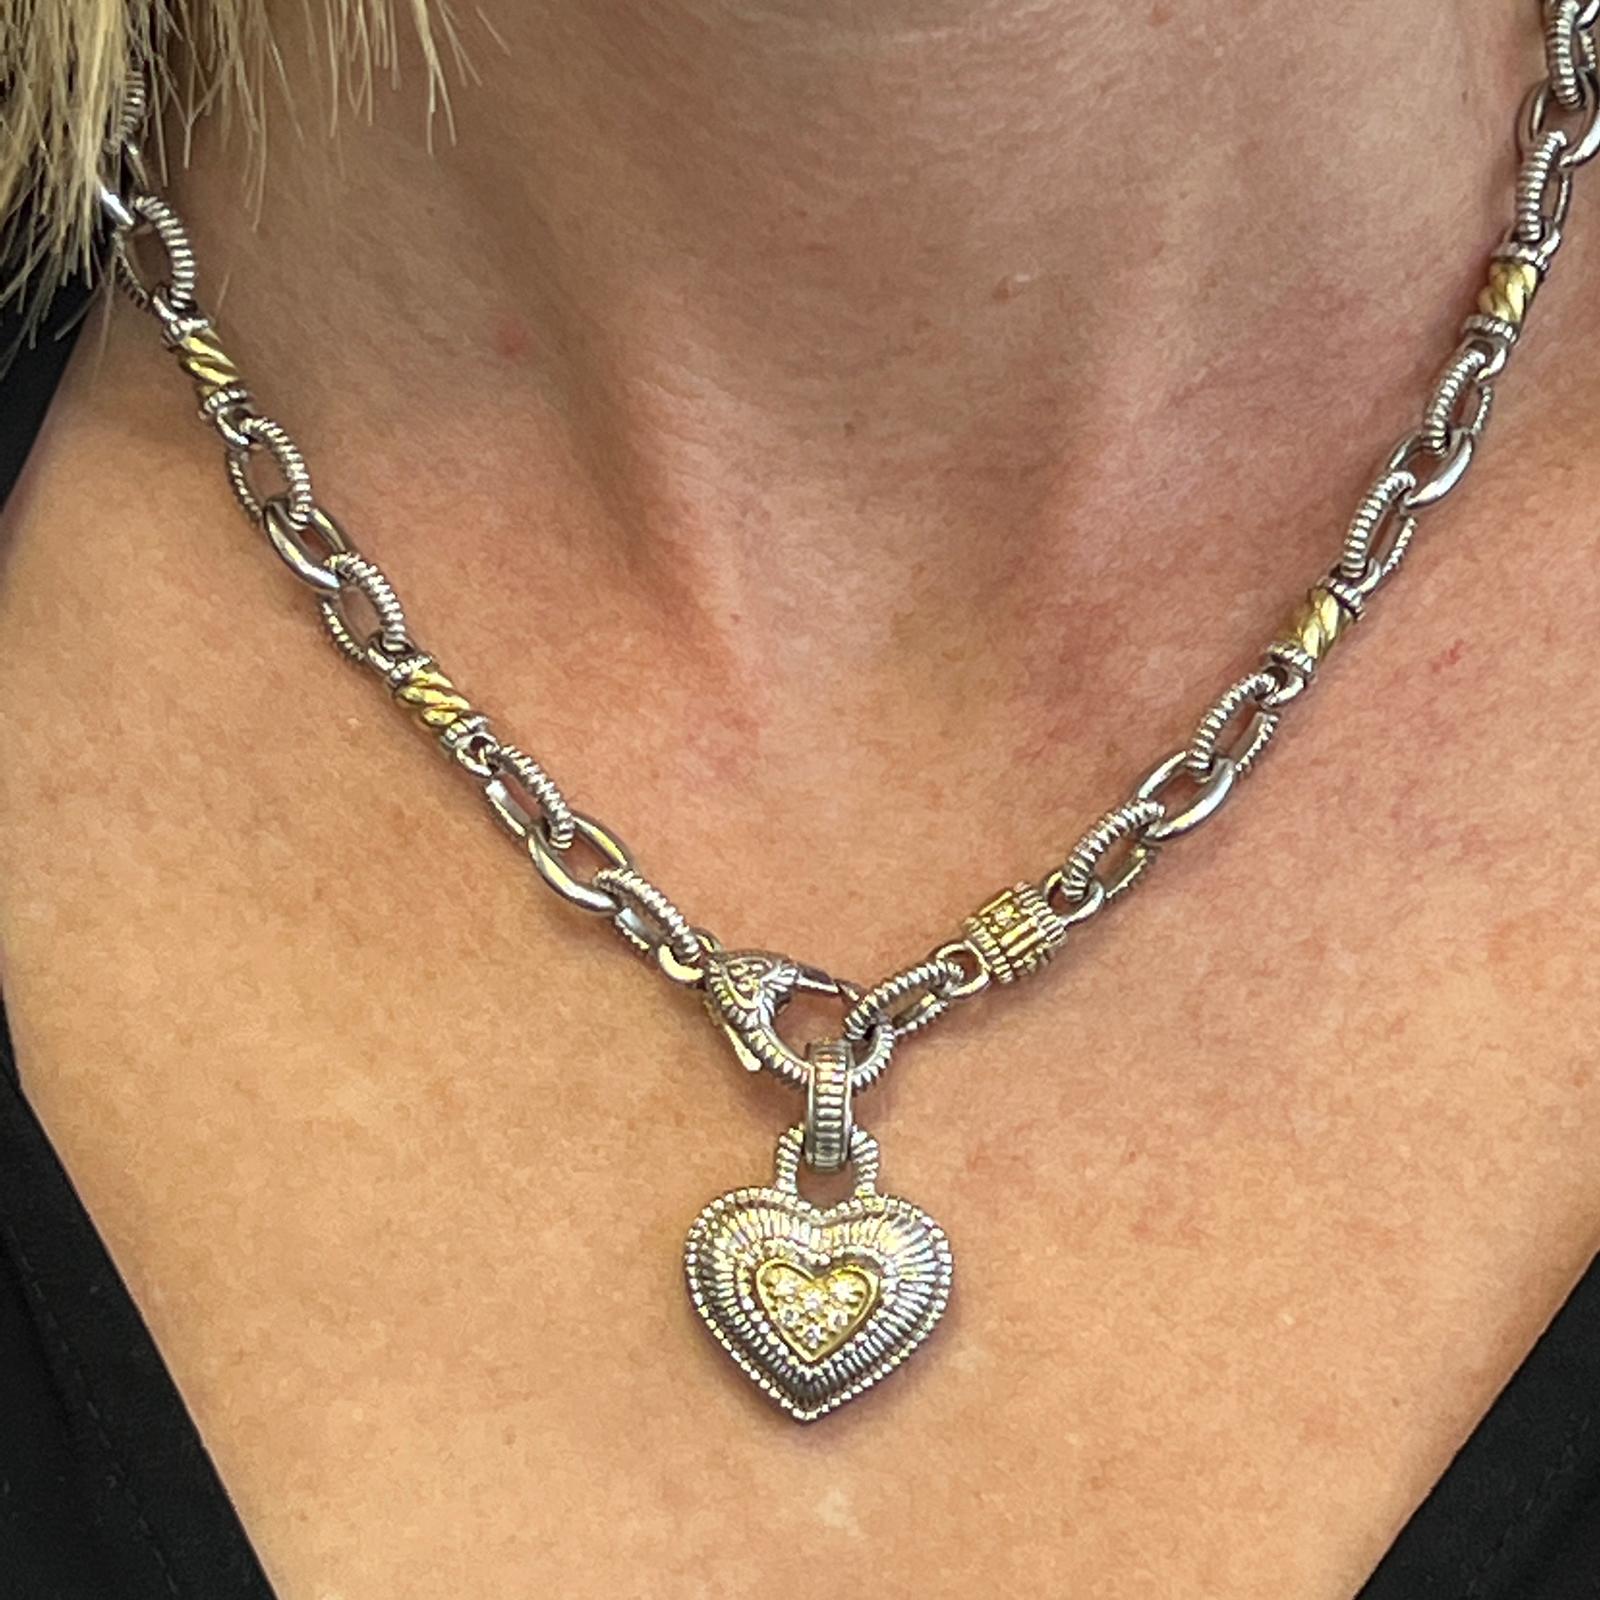 Diamond heart pendant necklace fashioned in 18 karat yellow gold and sterling silver by designer Judith Ripka. The necklace features 14 round brilliant cut diamonds weighing approximately .21 CTW. The detachable heart measures .90 x 1.0 inches, and